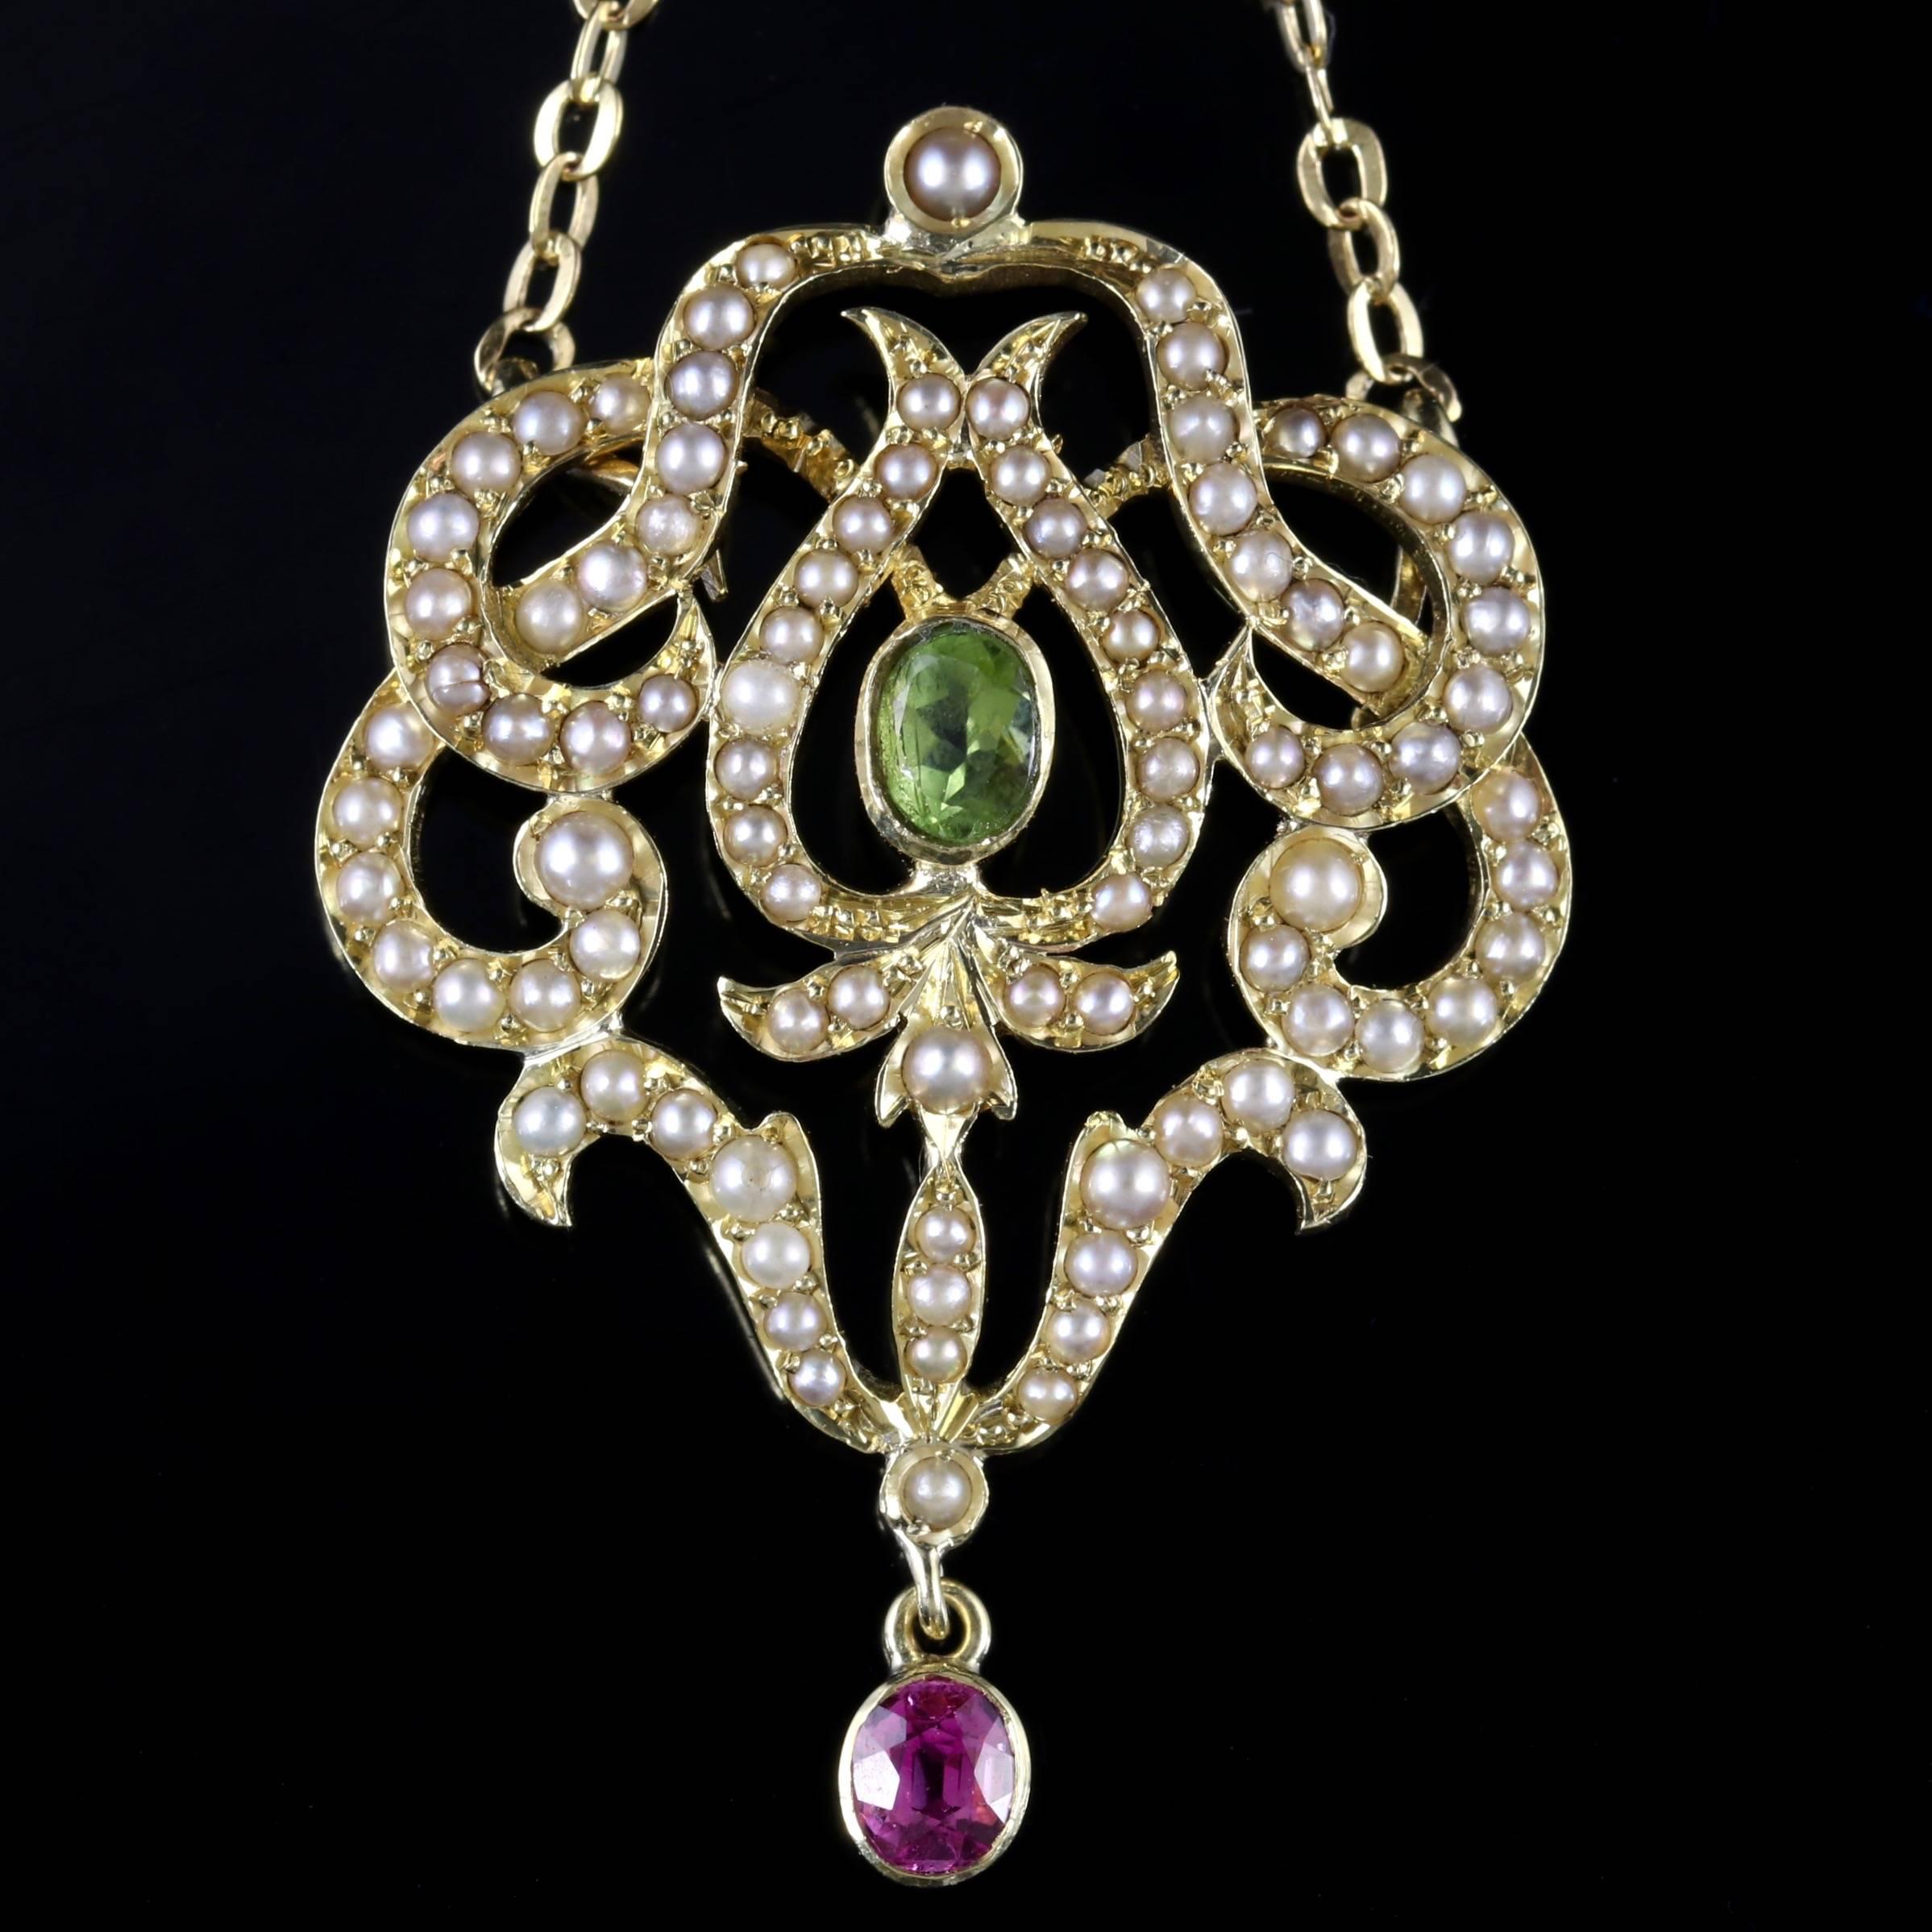 This truly beautiful Victorian 15ct Gold Suffragette drop Pendant is Circa 1900. 

The pendant is adorned with lustrous Pearls which are set into the floral style gallery, it is adorned with a Pink Sapphire on the bale, which leads down to the